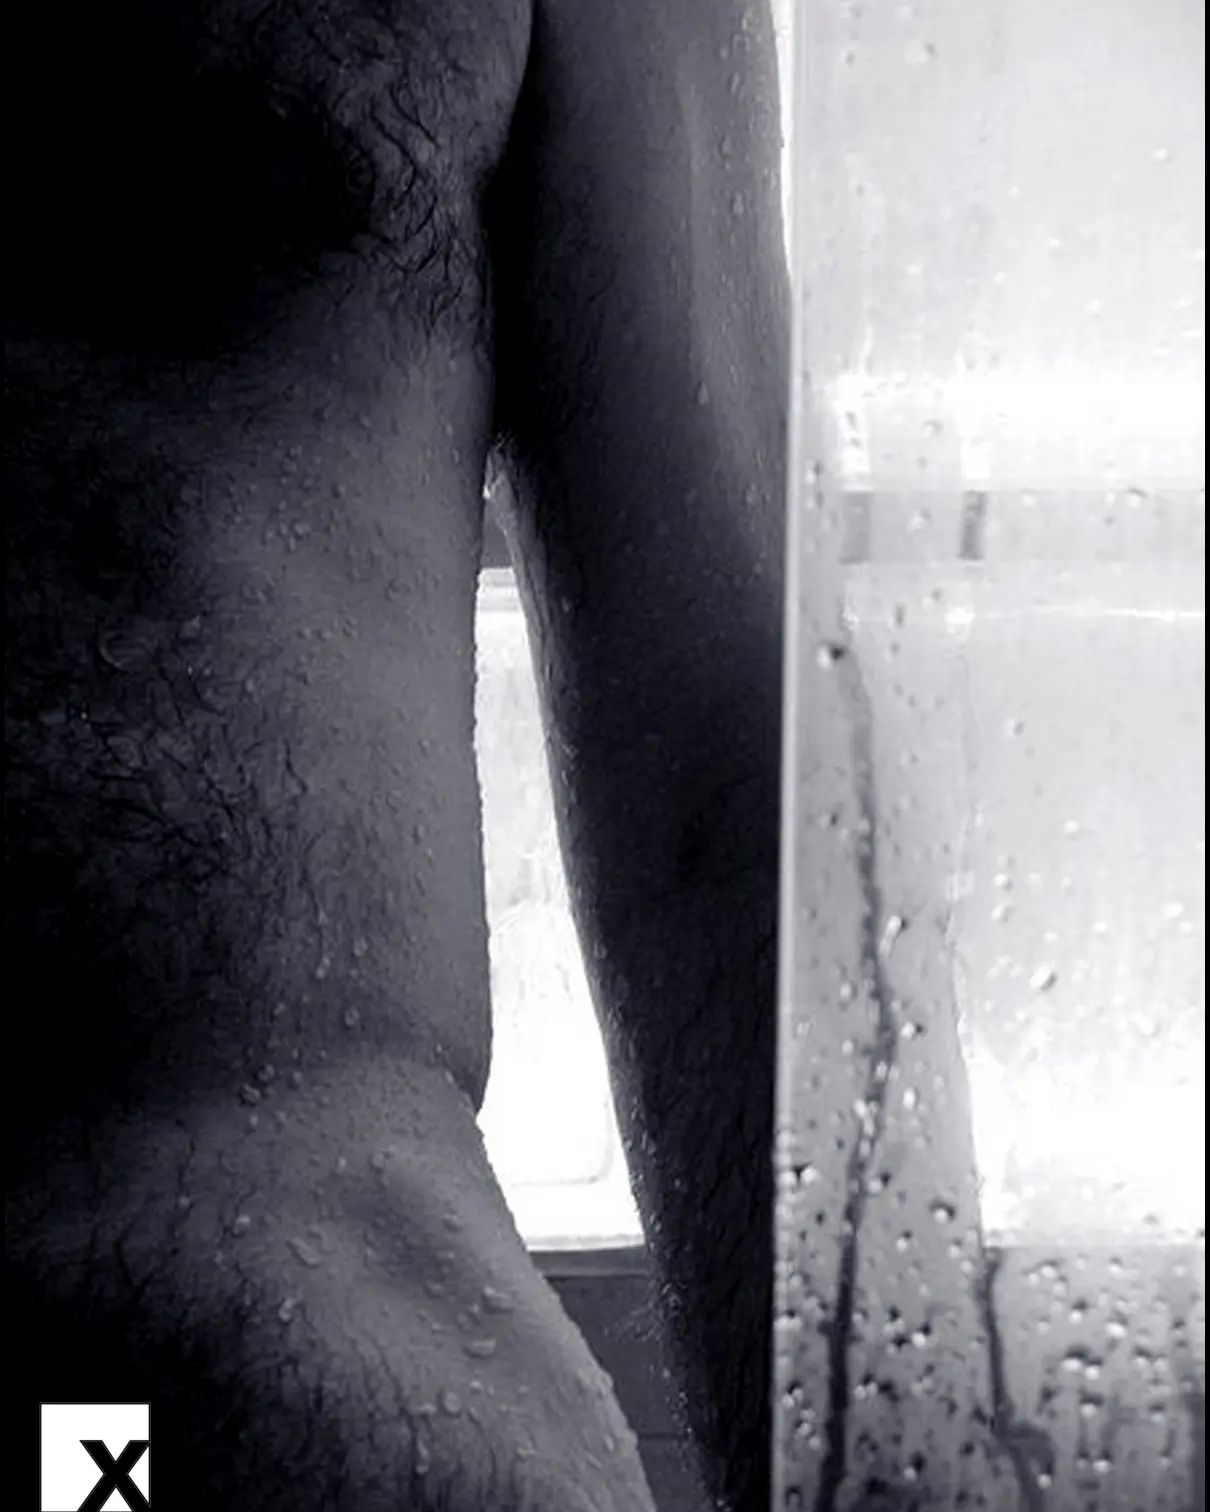 #hairy #wet #gay #xposed #hard #xxx #naked #homo #bear #muscled #homoerotic #homophotograpy